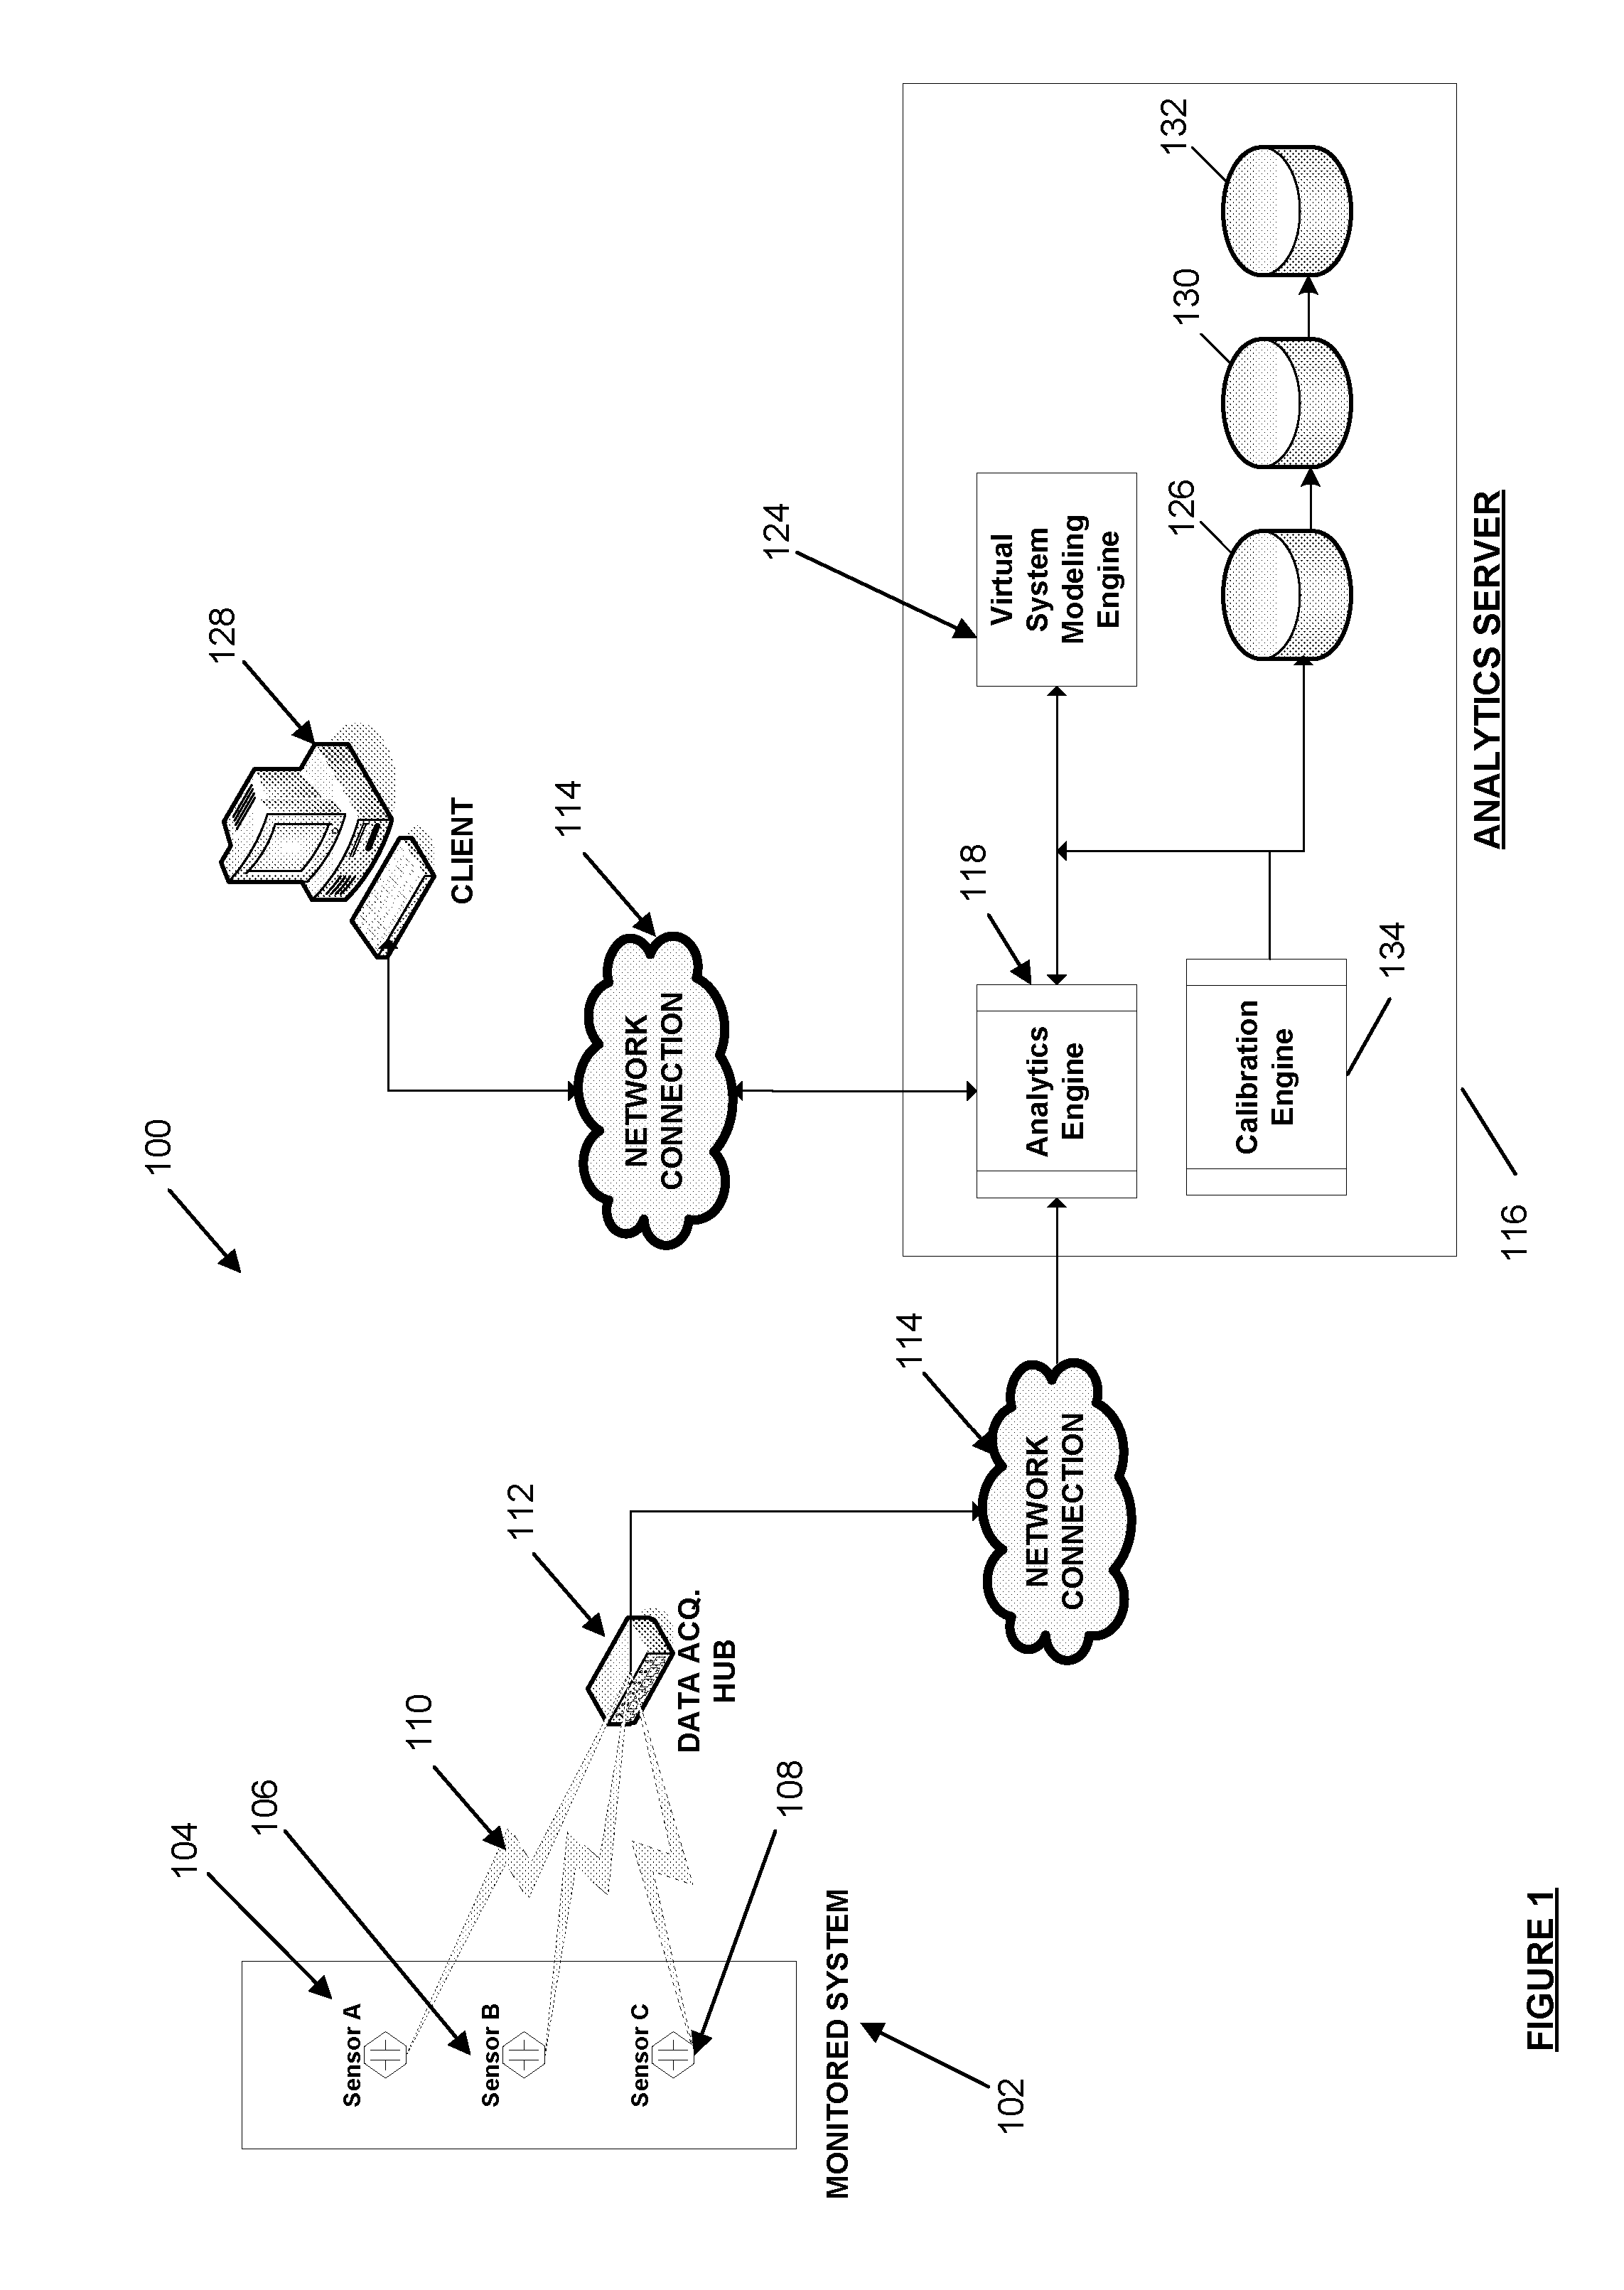 Systems and methods for alarm filtering and management within a real-time data acquisition and monitoring environment